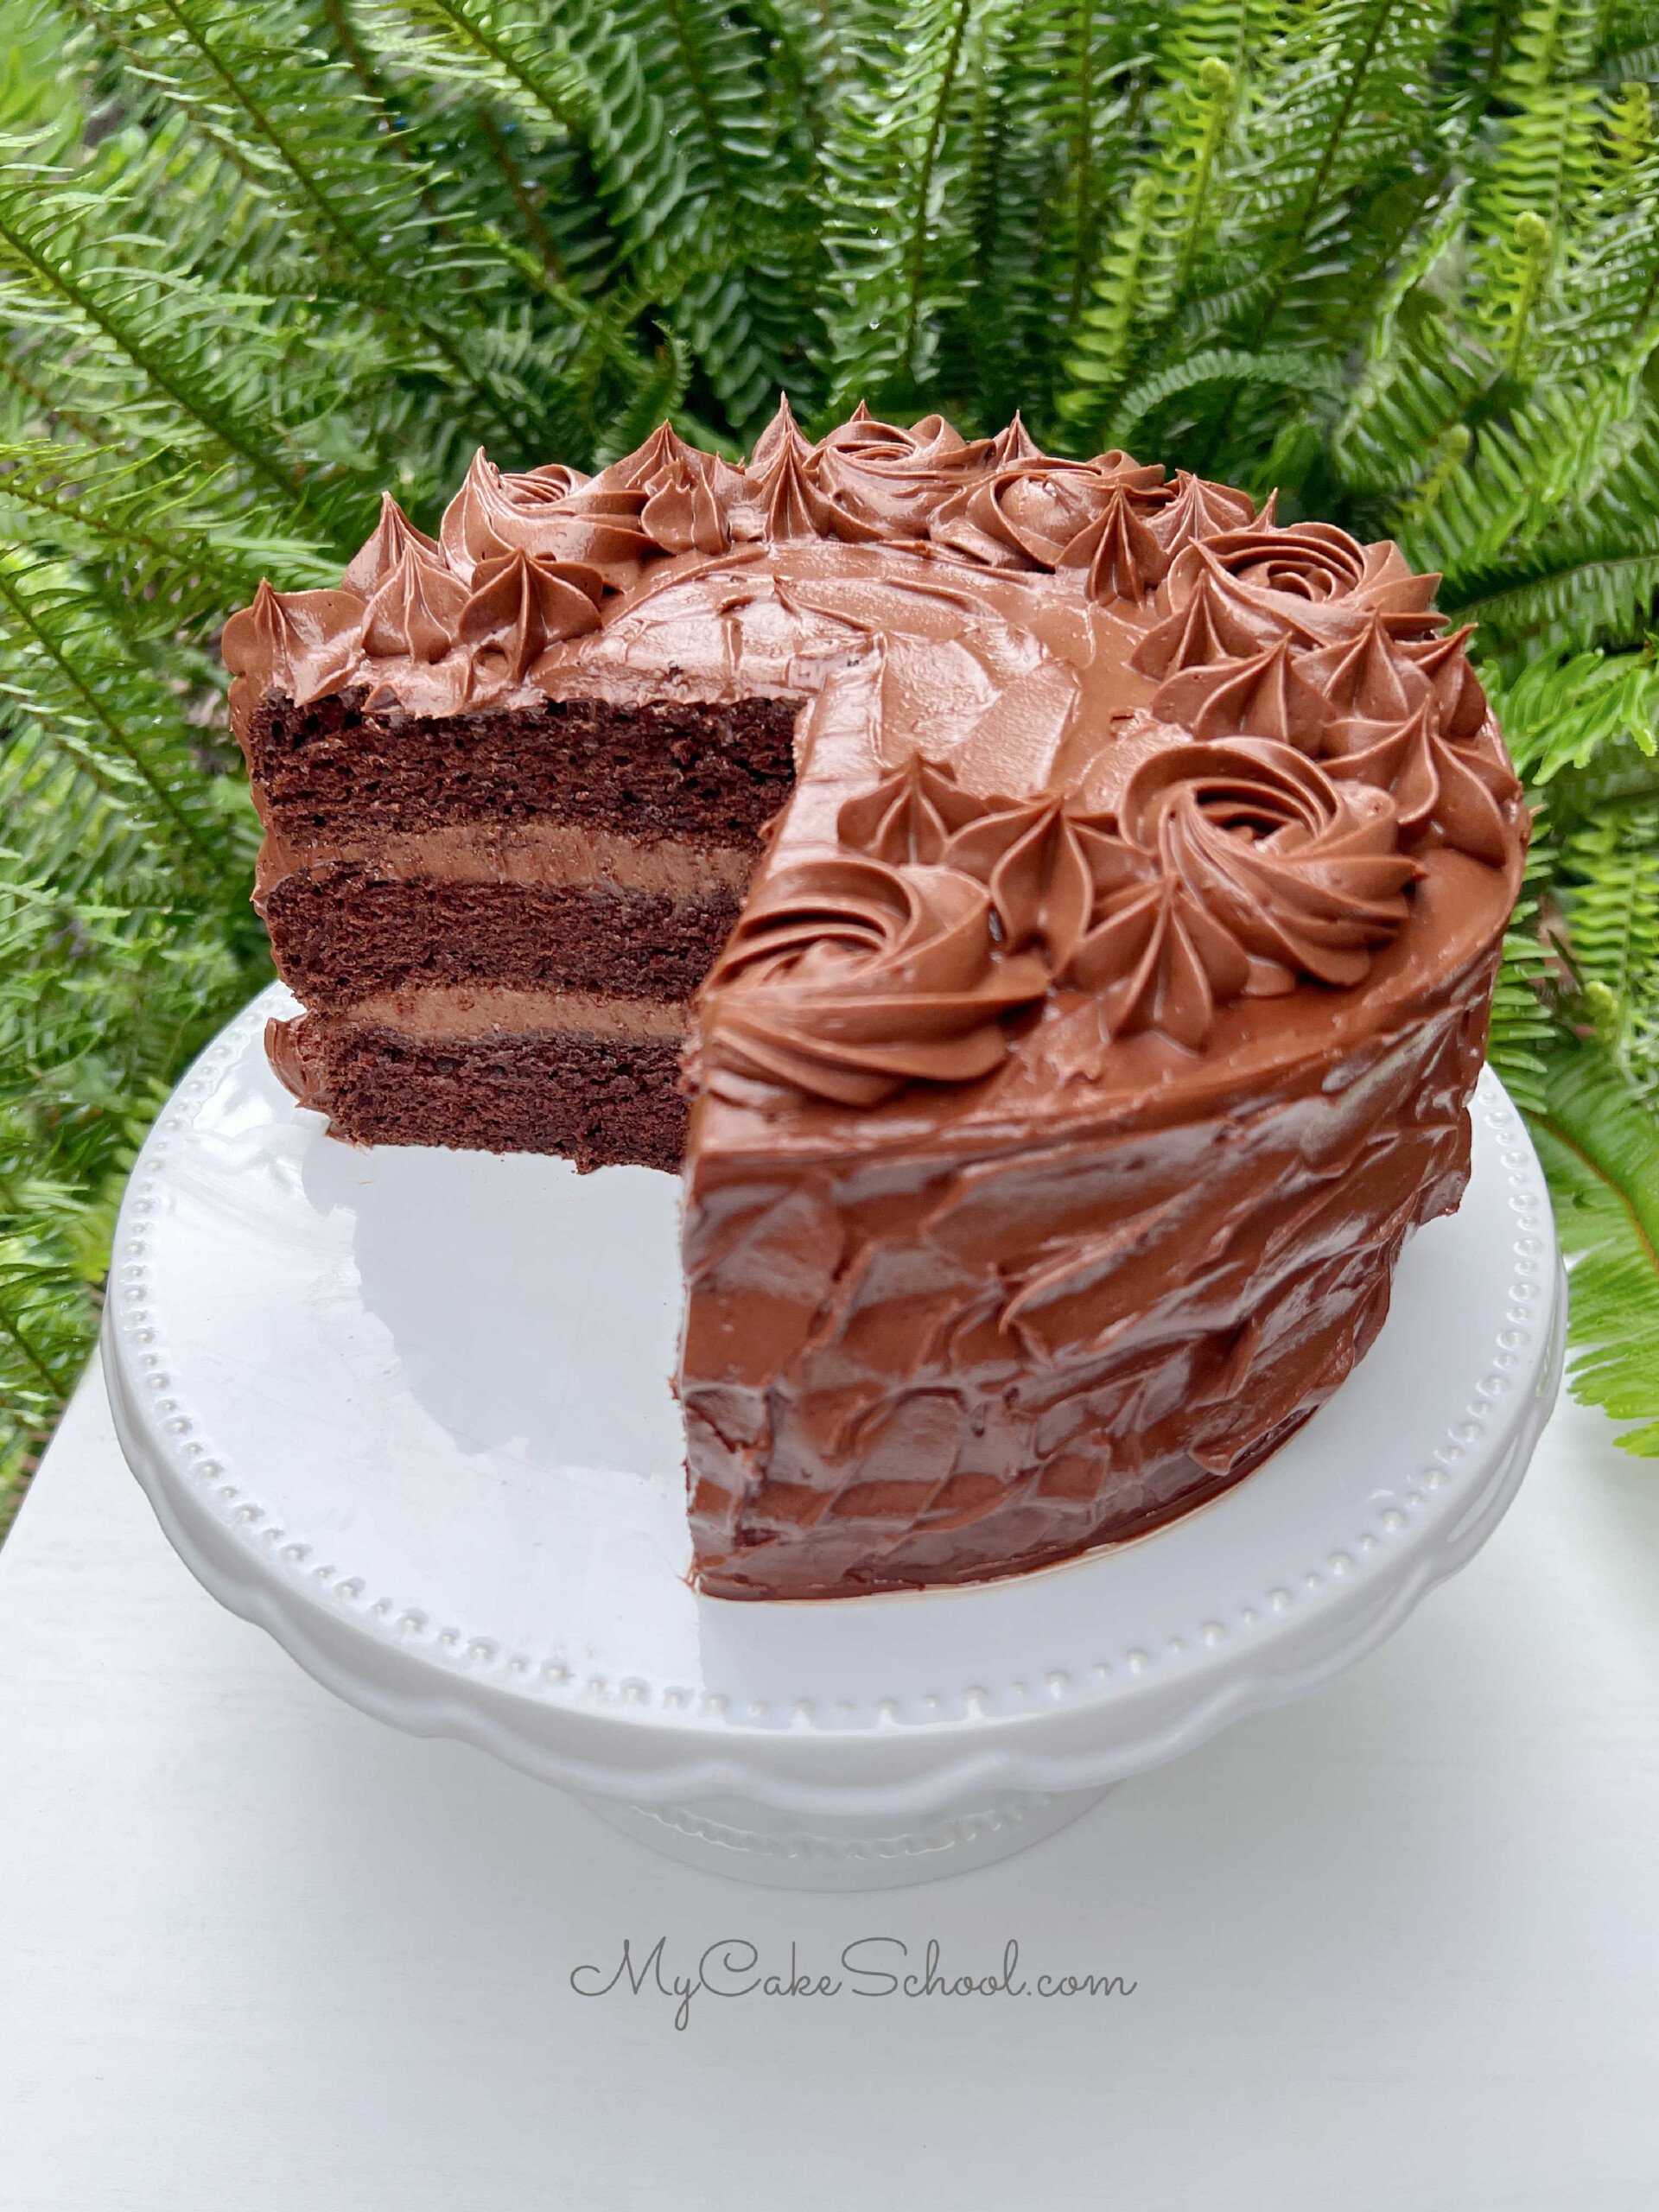 Chocolate Mousse Cake with chocolate frosting, sliced, on a white pedestal.